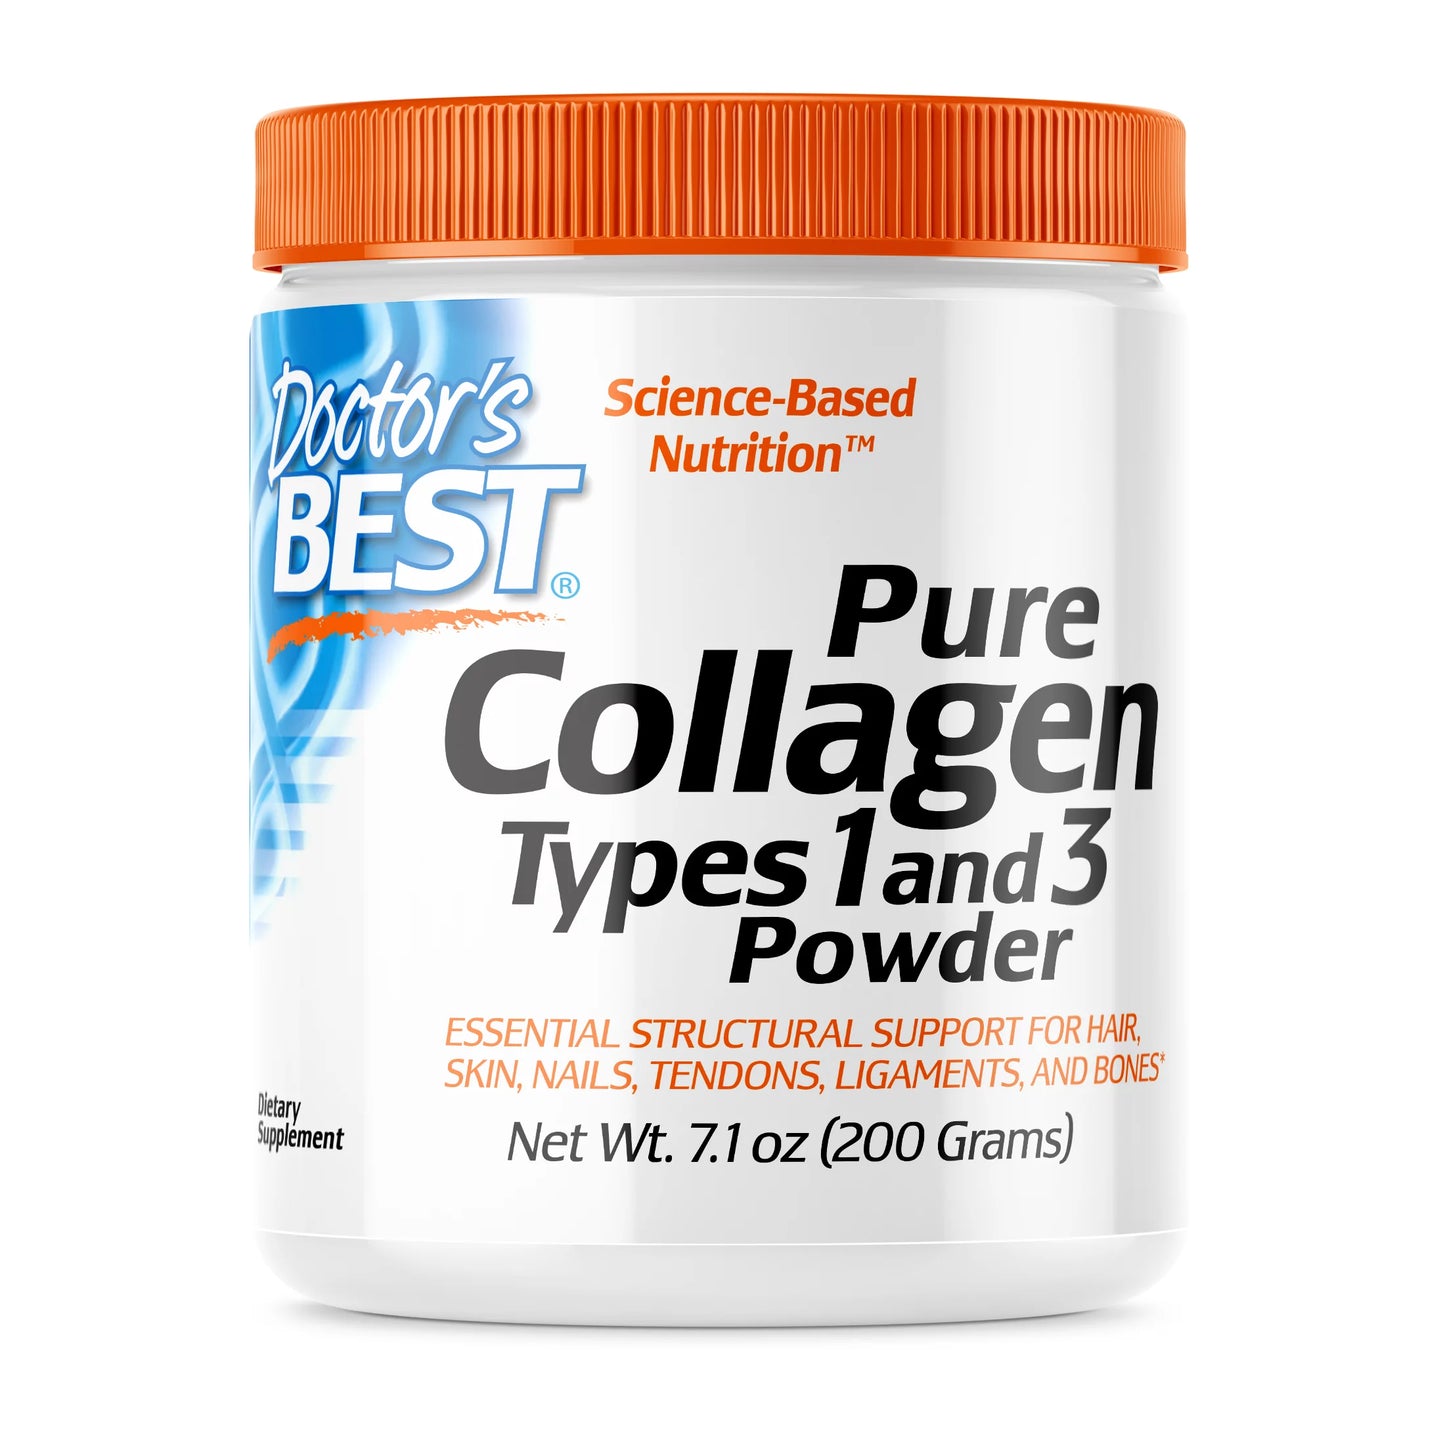 DOCTOR’S BEST PURE COLLAGEN TYPES 1 AND 3 POWDER